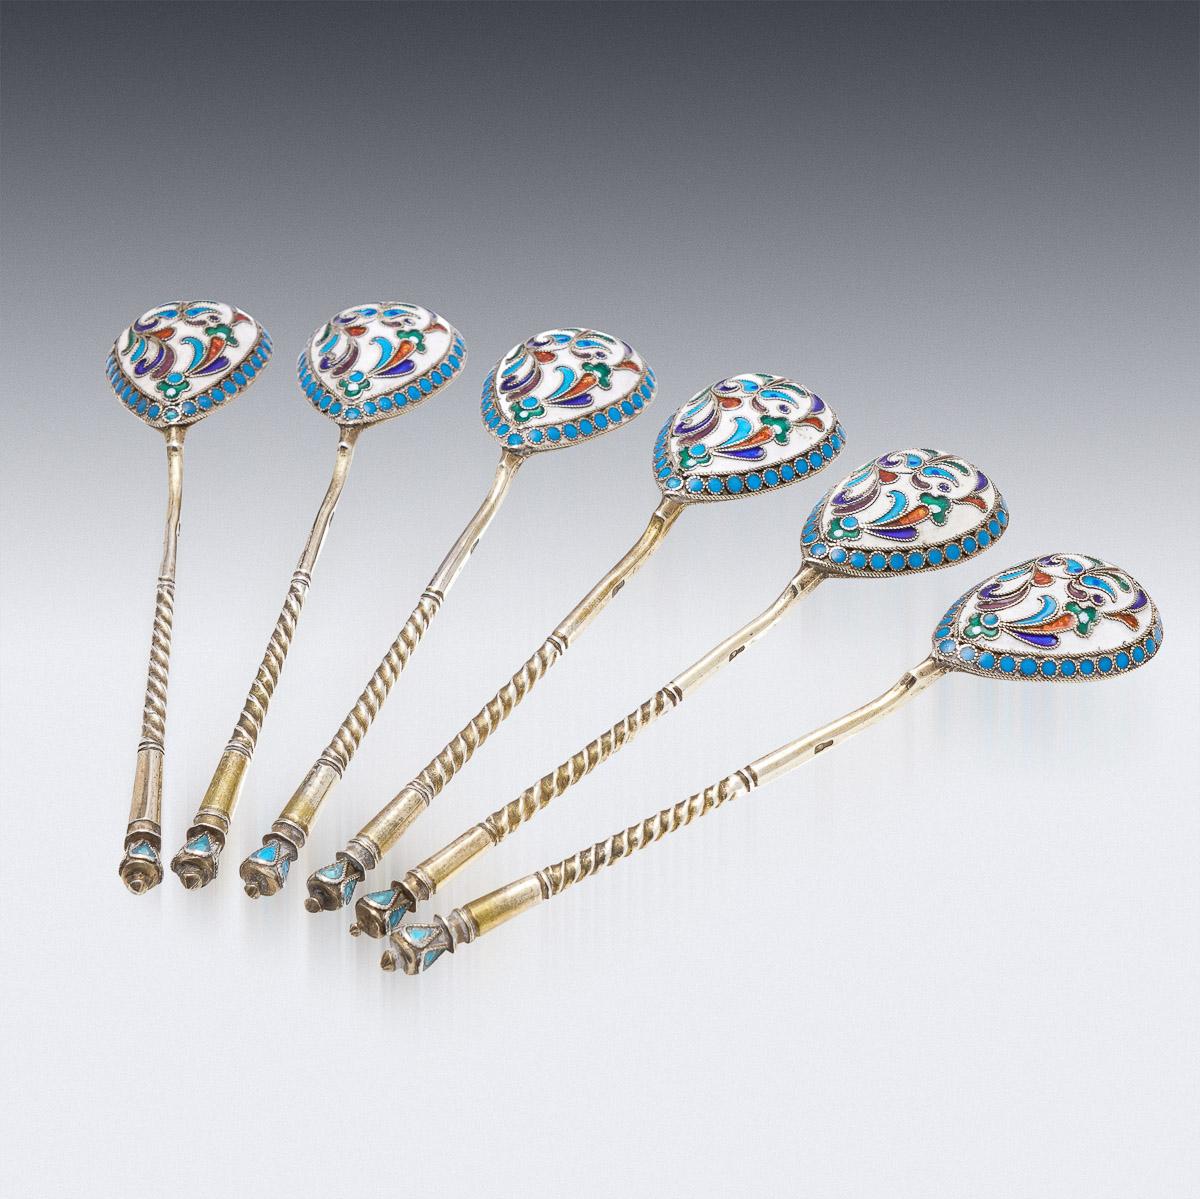 Antique early-20th Century Imperial Russian solid silver set of 6 tea spoons, beautifully cloisonne' enamelled with a multicoloured scrolling foliage and floral decoration on a white ground. Each piece is Hallmarked Russian Silver 84 (875 standard),